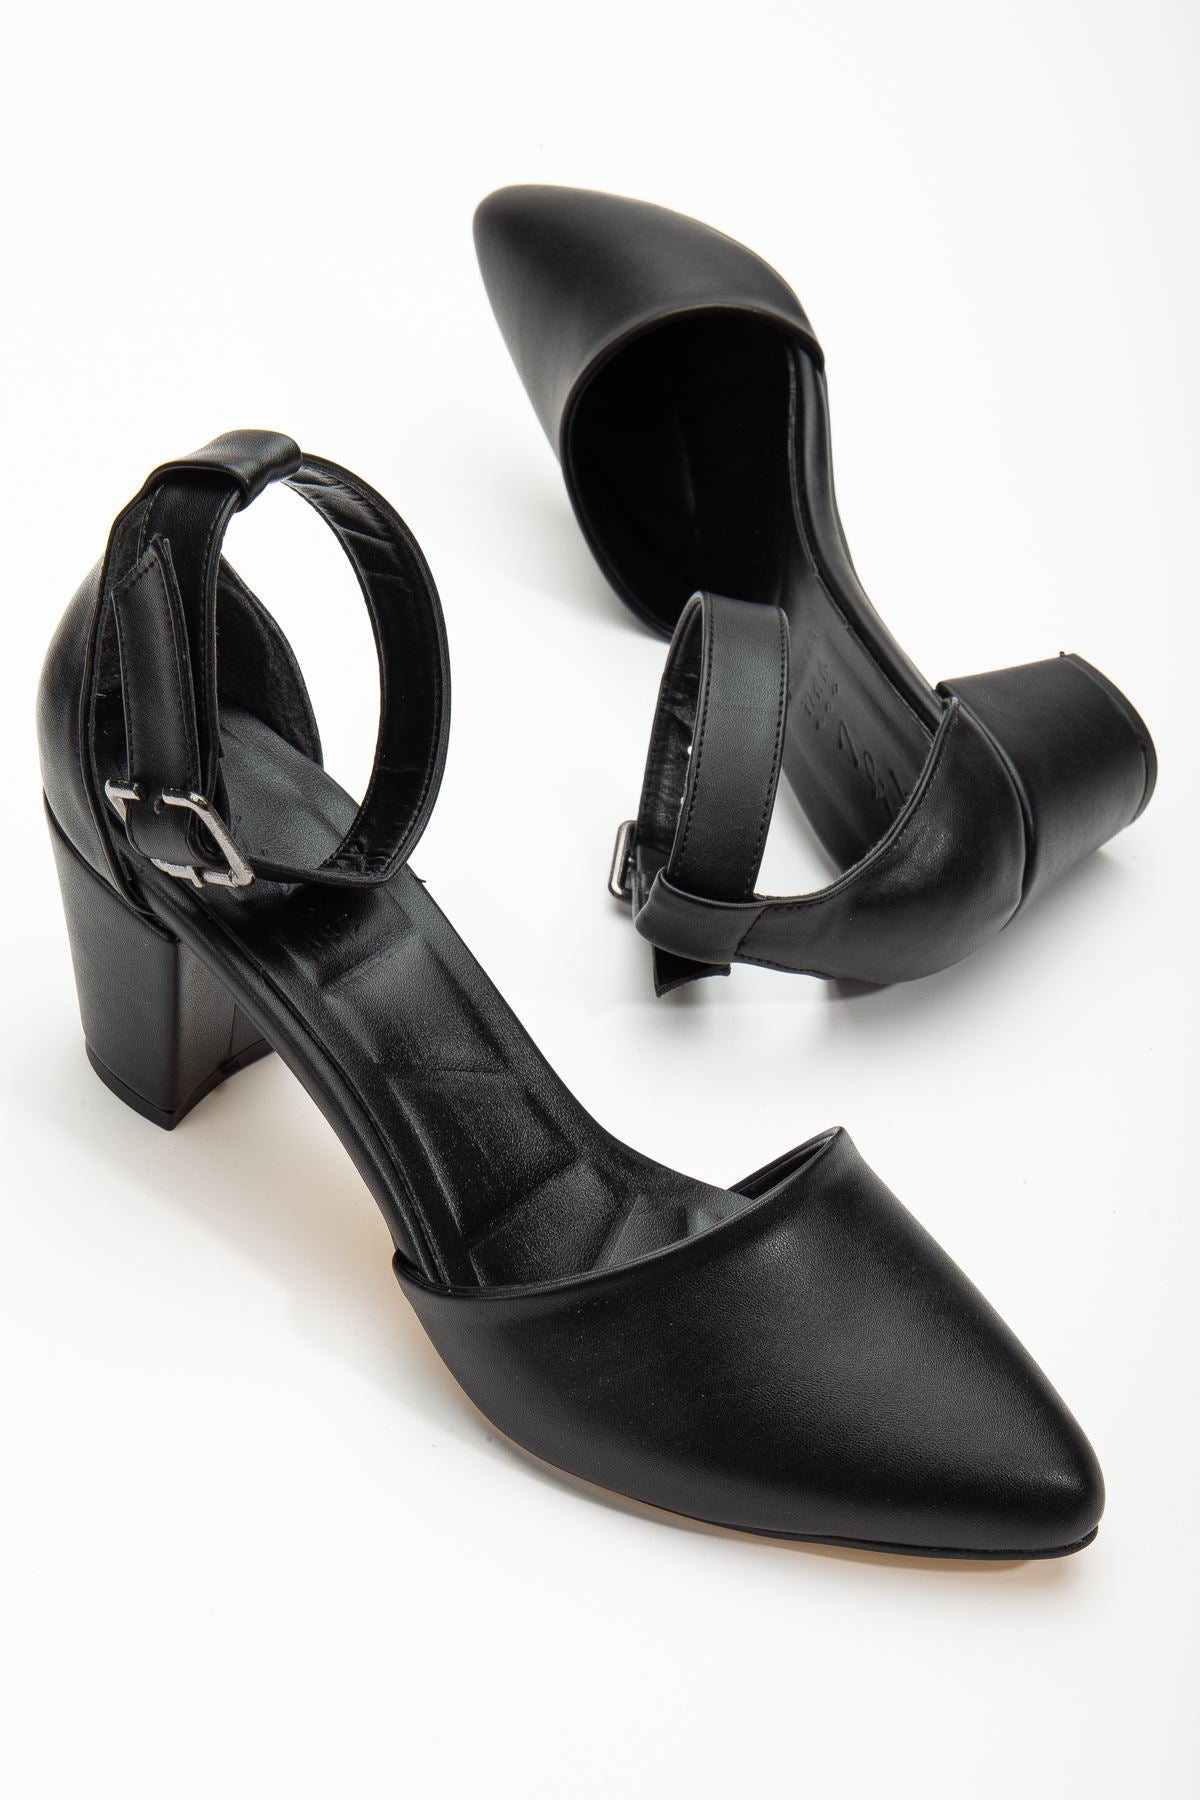 Lottis Black Leather Detailed Heeled Women's Shoes - STREETMODE™